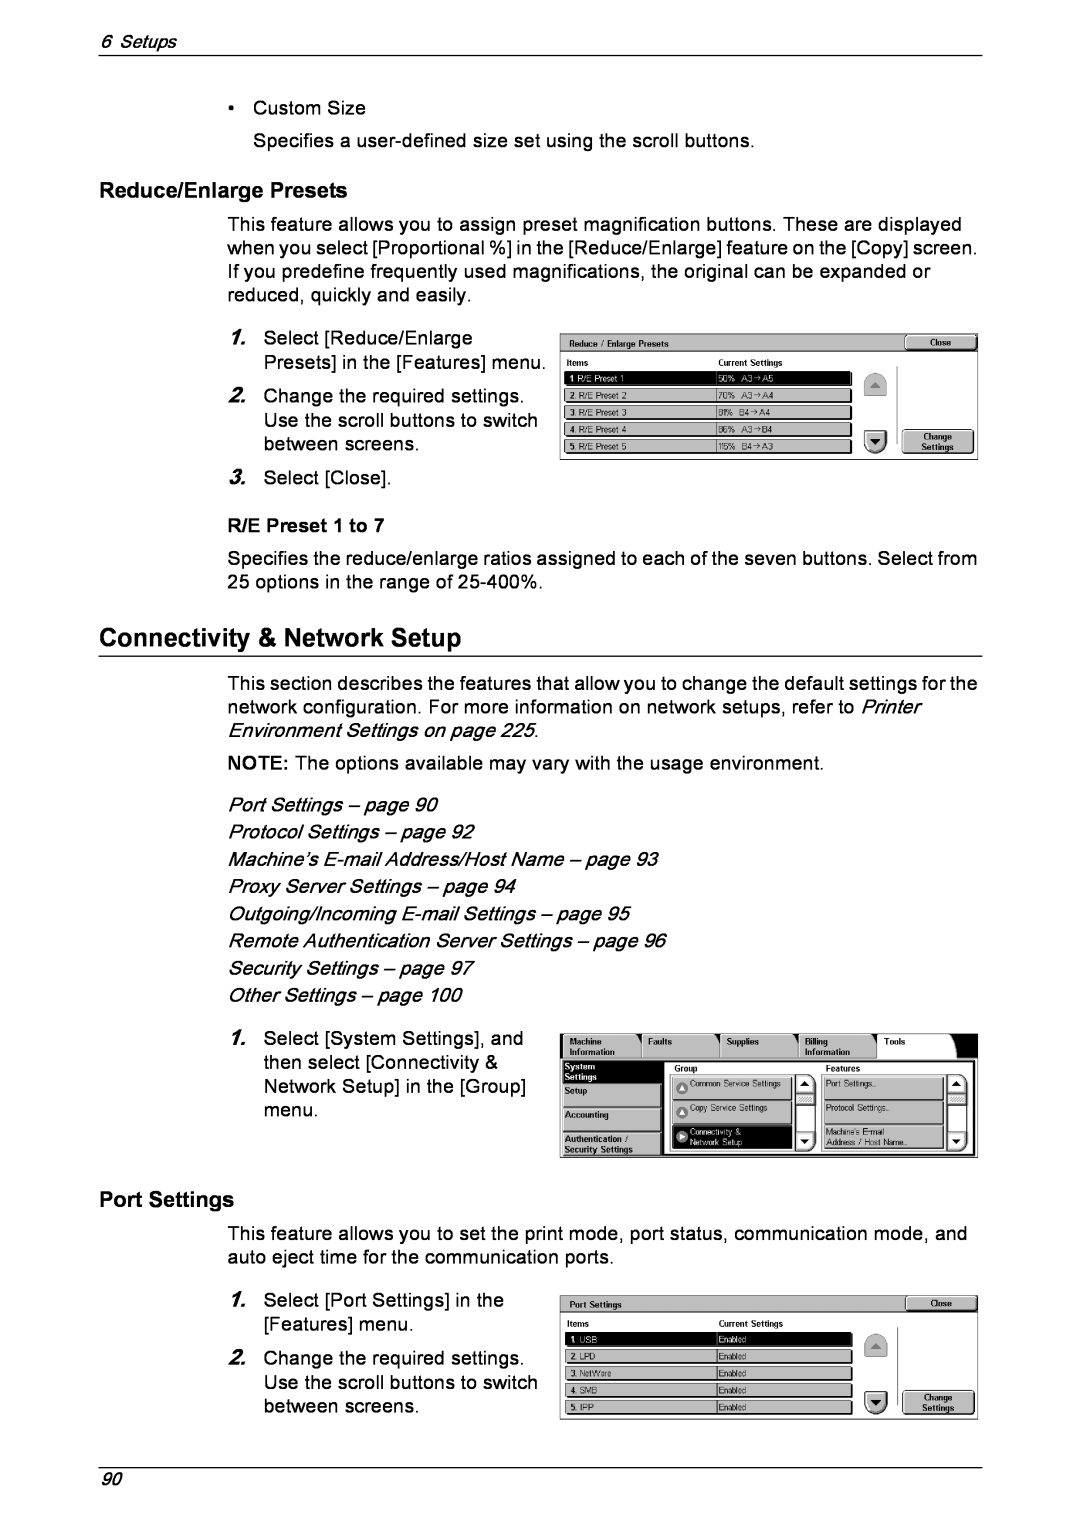 Xerox 5222 manual Connectivity & Network Setup, R/E Preset 1 to, Port Settings – page Protocol Settings – page 